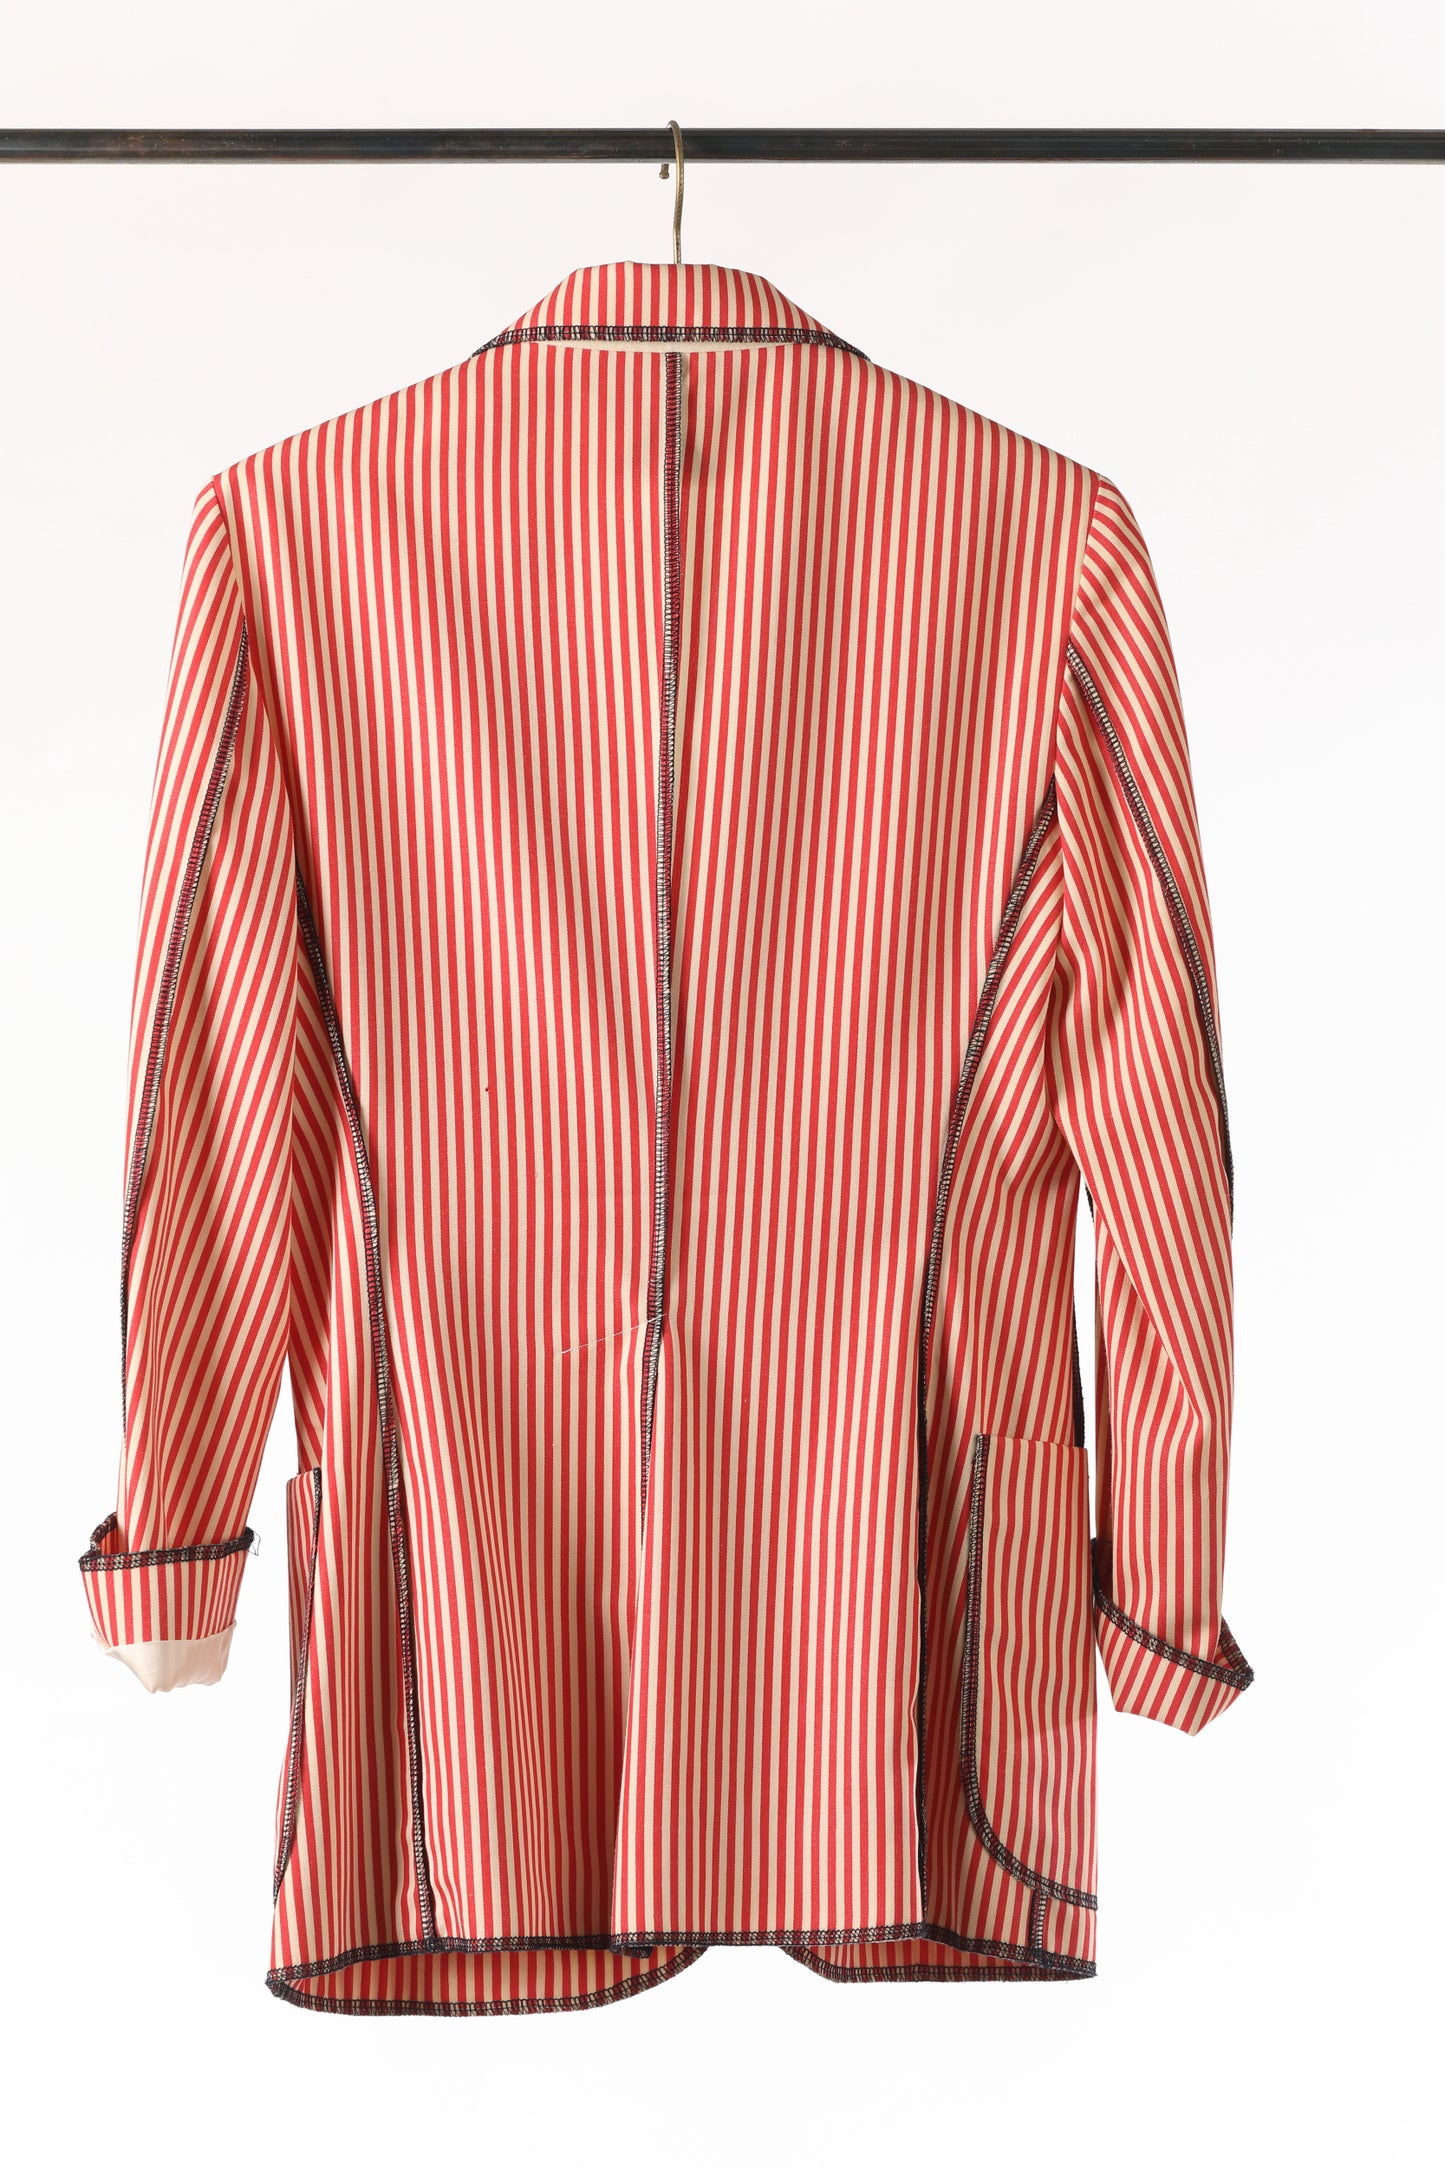 Moschino Cheap &amp; Chic unlined jacket from the late 90s